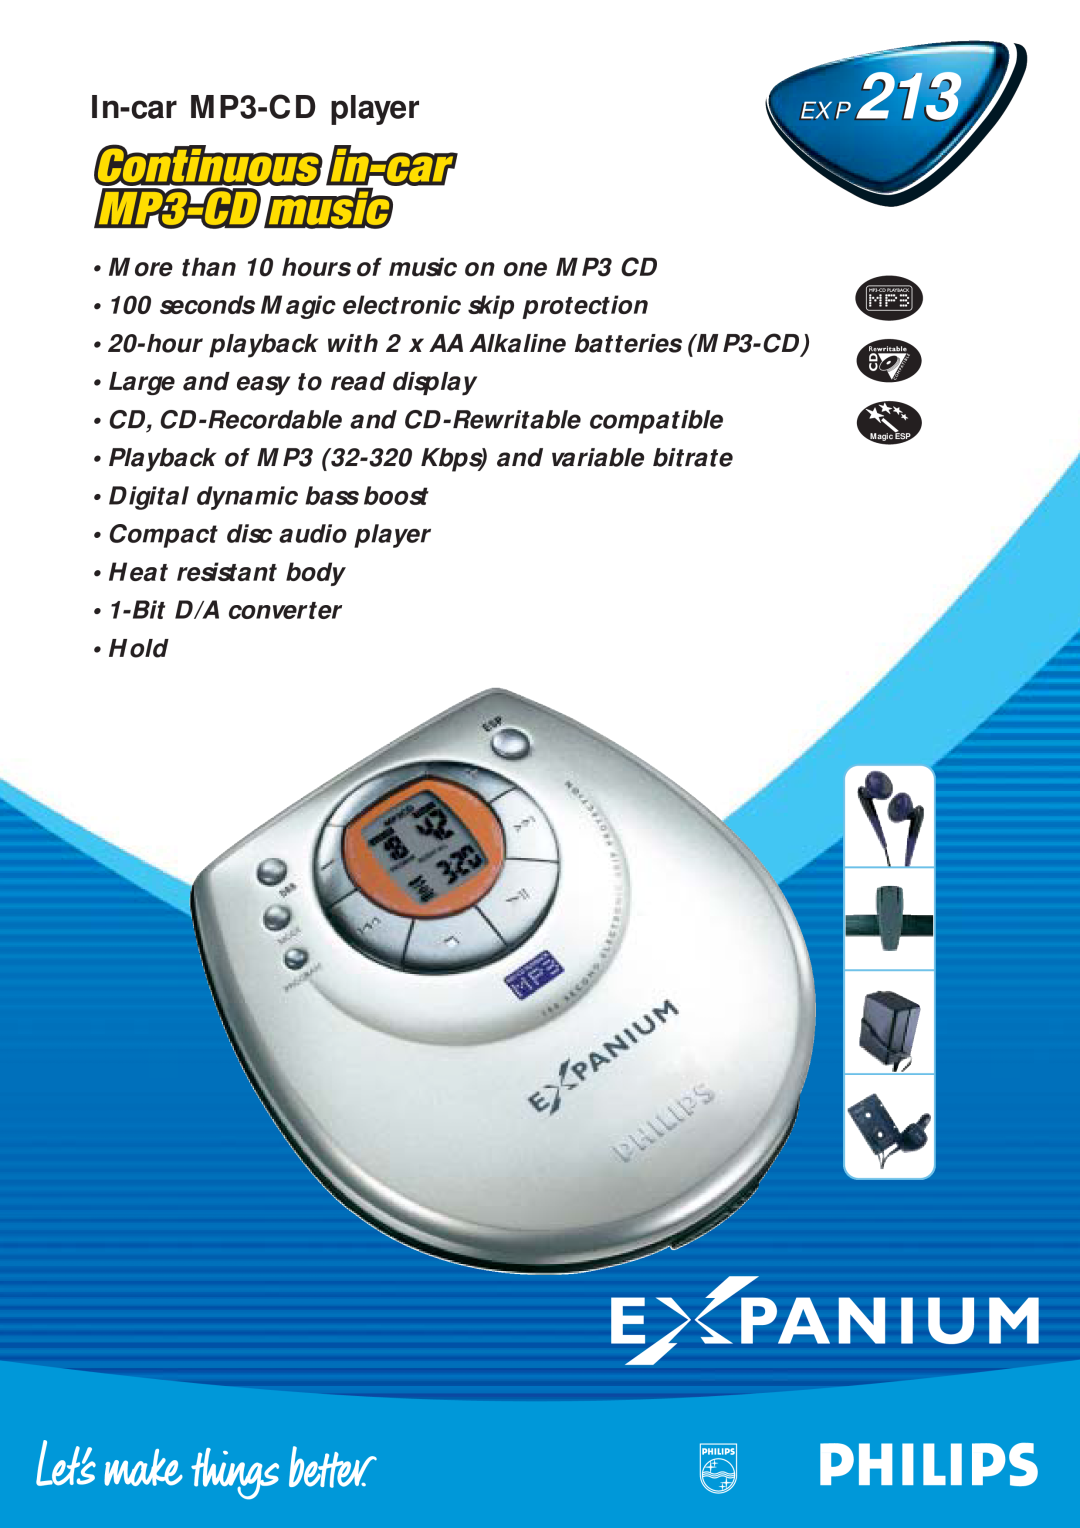 Philips EXP 213 manual In-car MP3-CD player, More than 10 hours of music on one MP3 CD, Large and easy to read display 